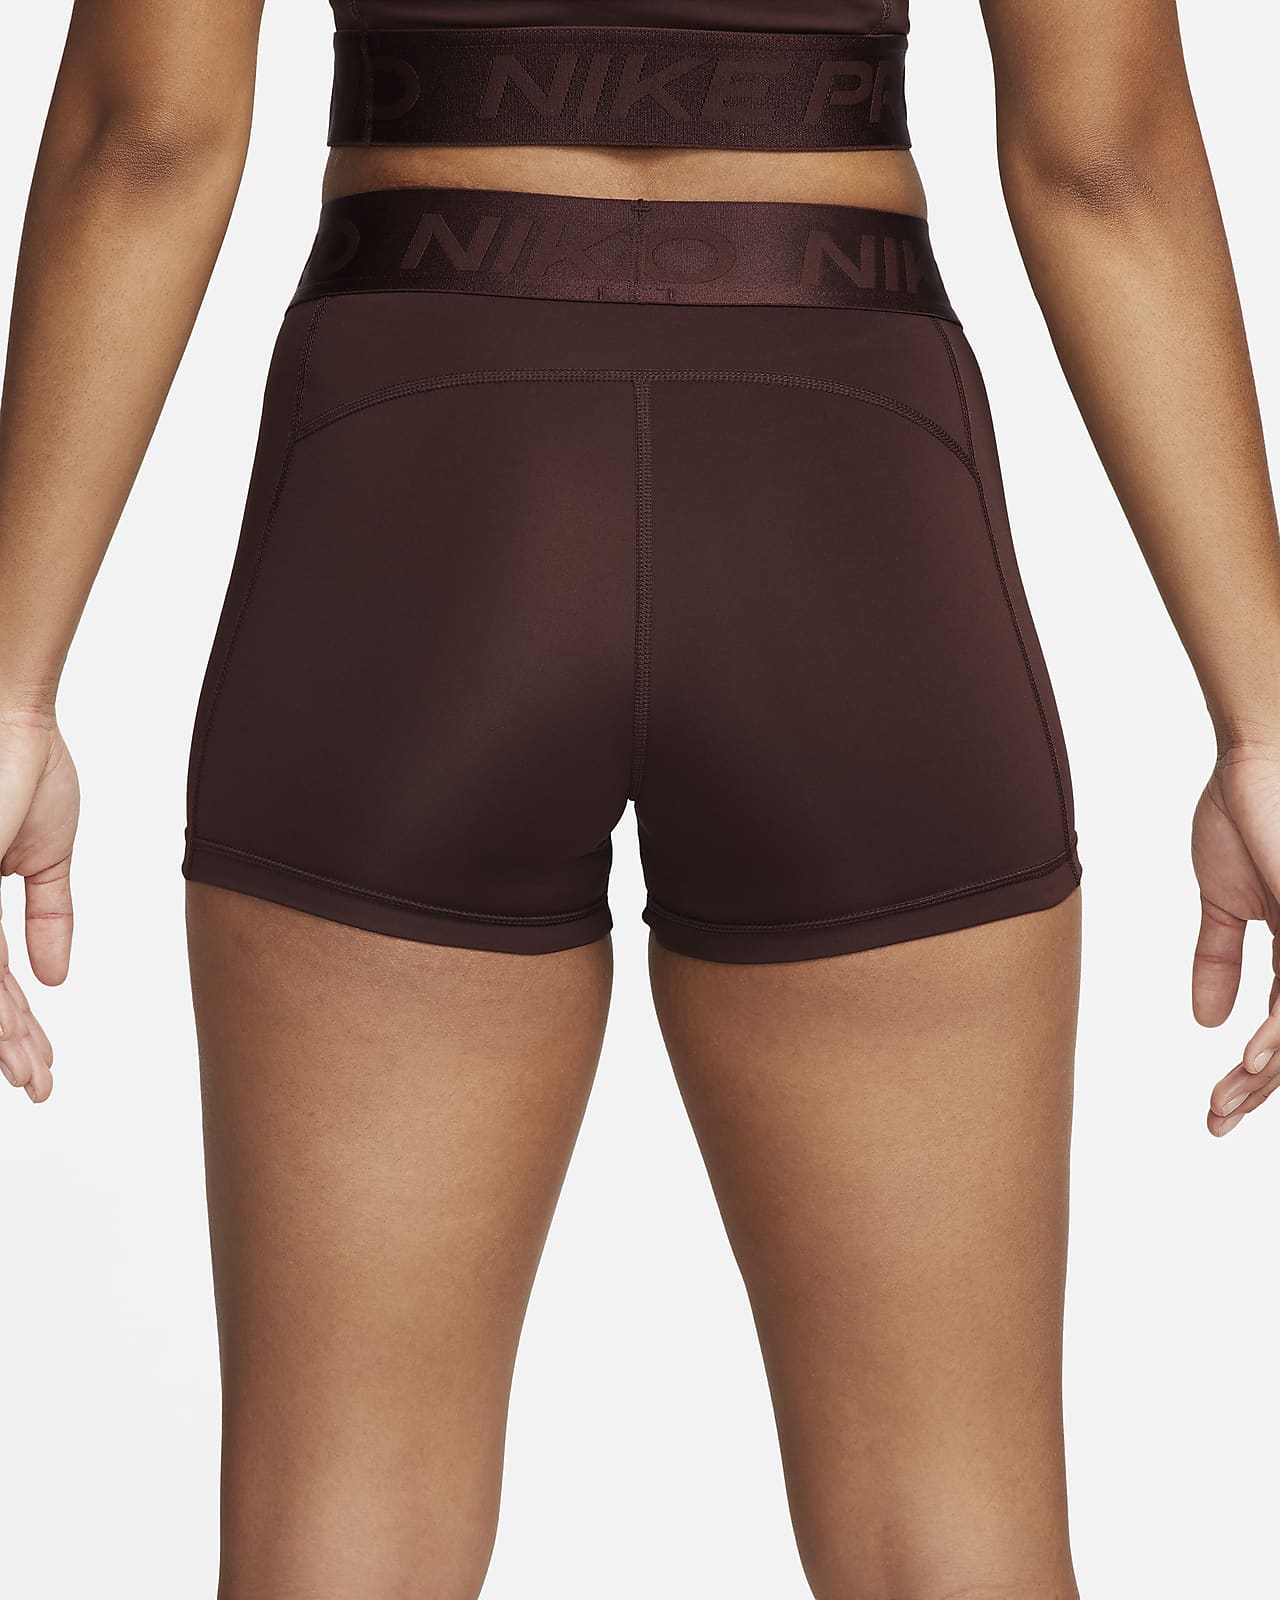 Brand:Nike Womens 3 Pro Compression Short Pink/Nude) ❌SOLD Size: S  Condition: As New . . . . . . . . #lebanon #beirut #luxury #libnan